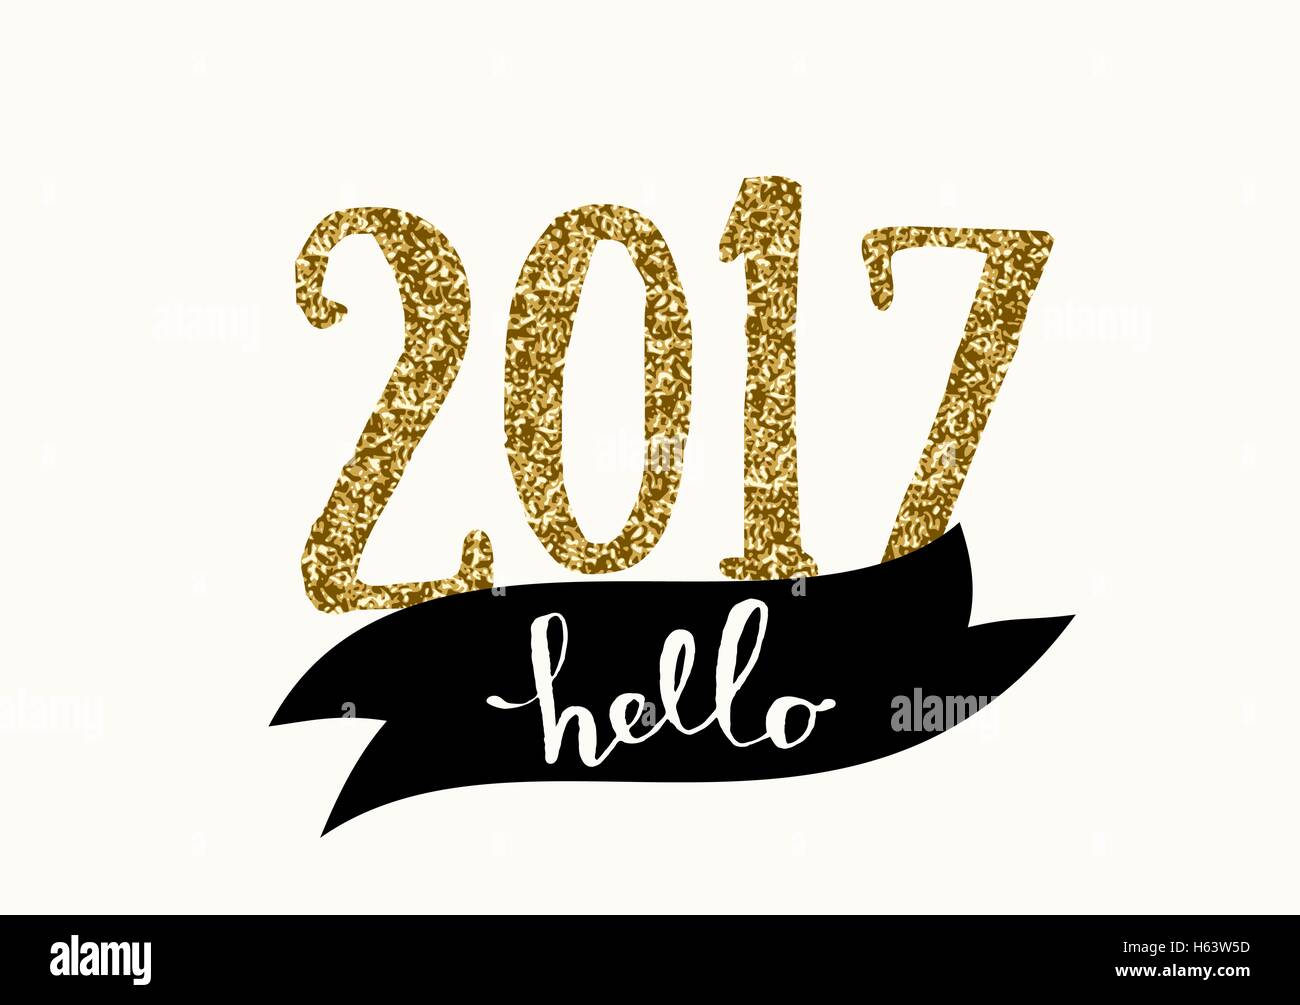 Typographic design greeting card template with text 'Hello 2017'. Modern style poster, greeting card, postcard design. Stock Vector